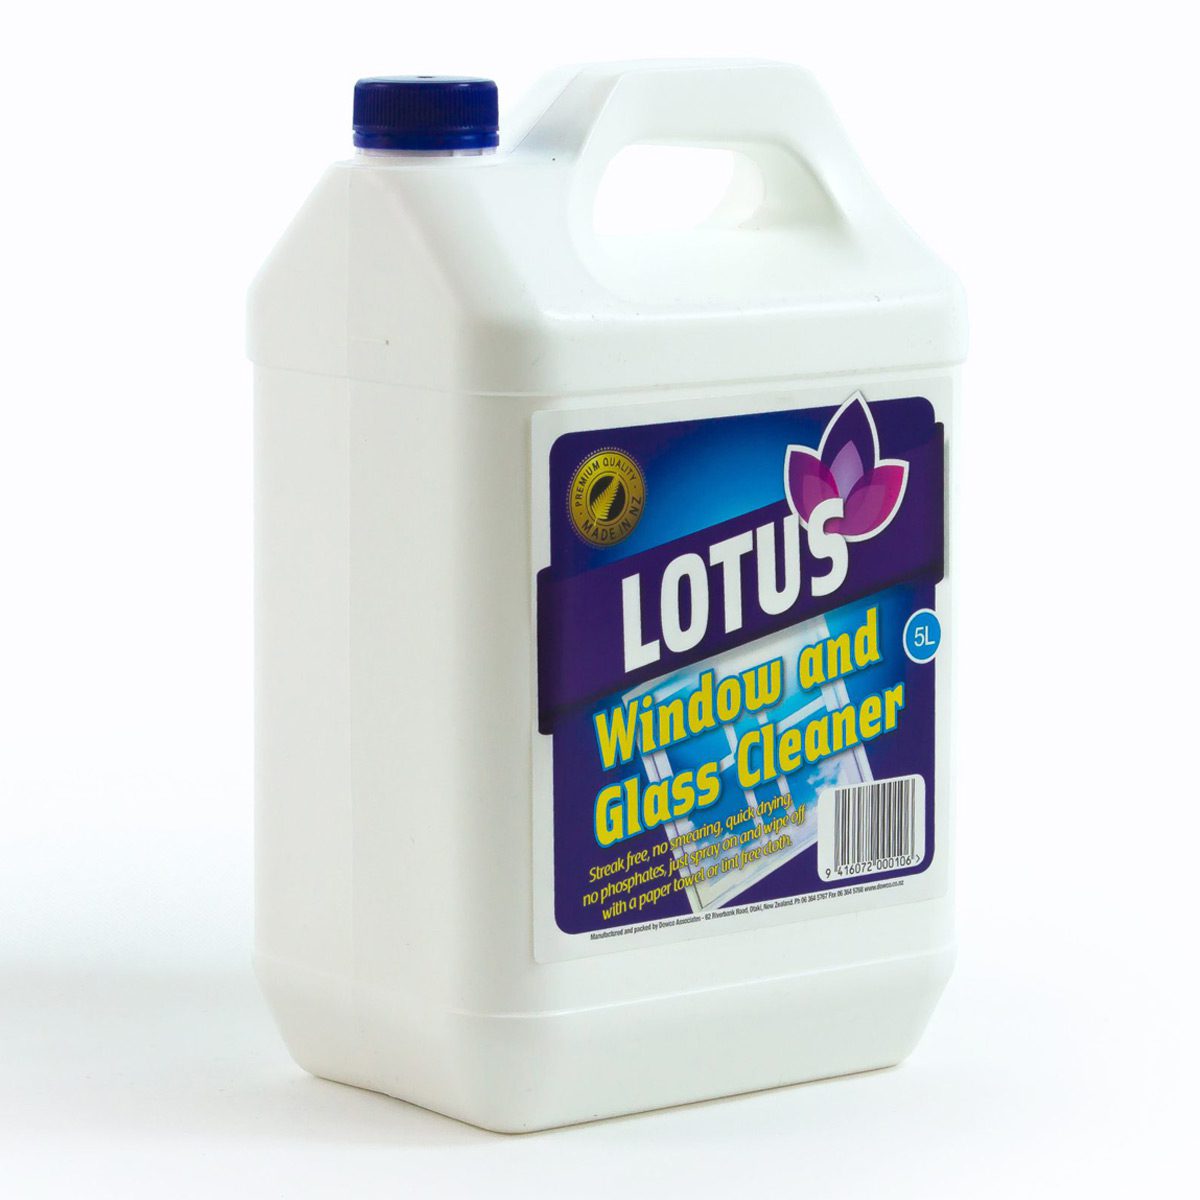 cleaning-products-kitchen-multipurpose-lotus-window-cleaner-5L-litre-uses-10%-alcohol-eco-green-surfactants-cleans-windows-glass-surfaces-quickly-leaves-no-streaking-vjs-distributors-LWC5